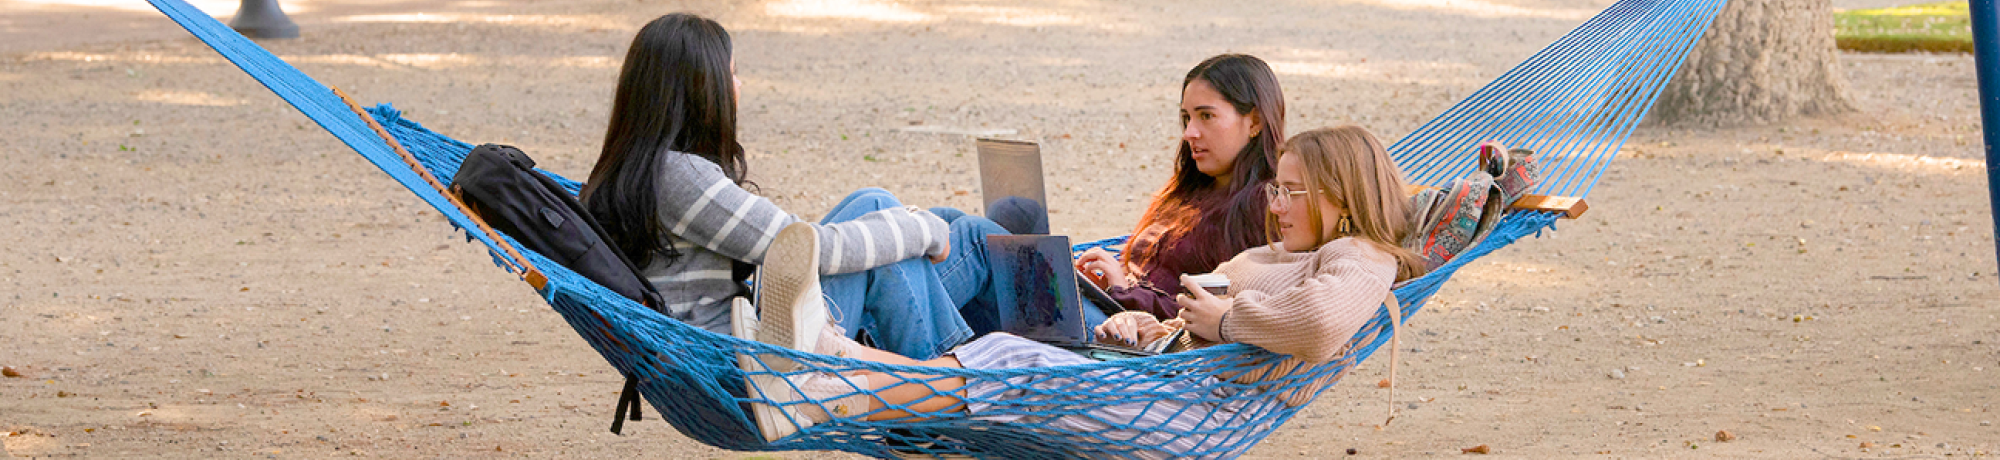 3 people with laptops in a hammock near the quad